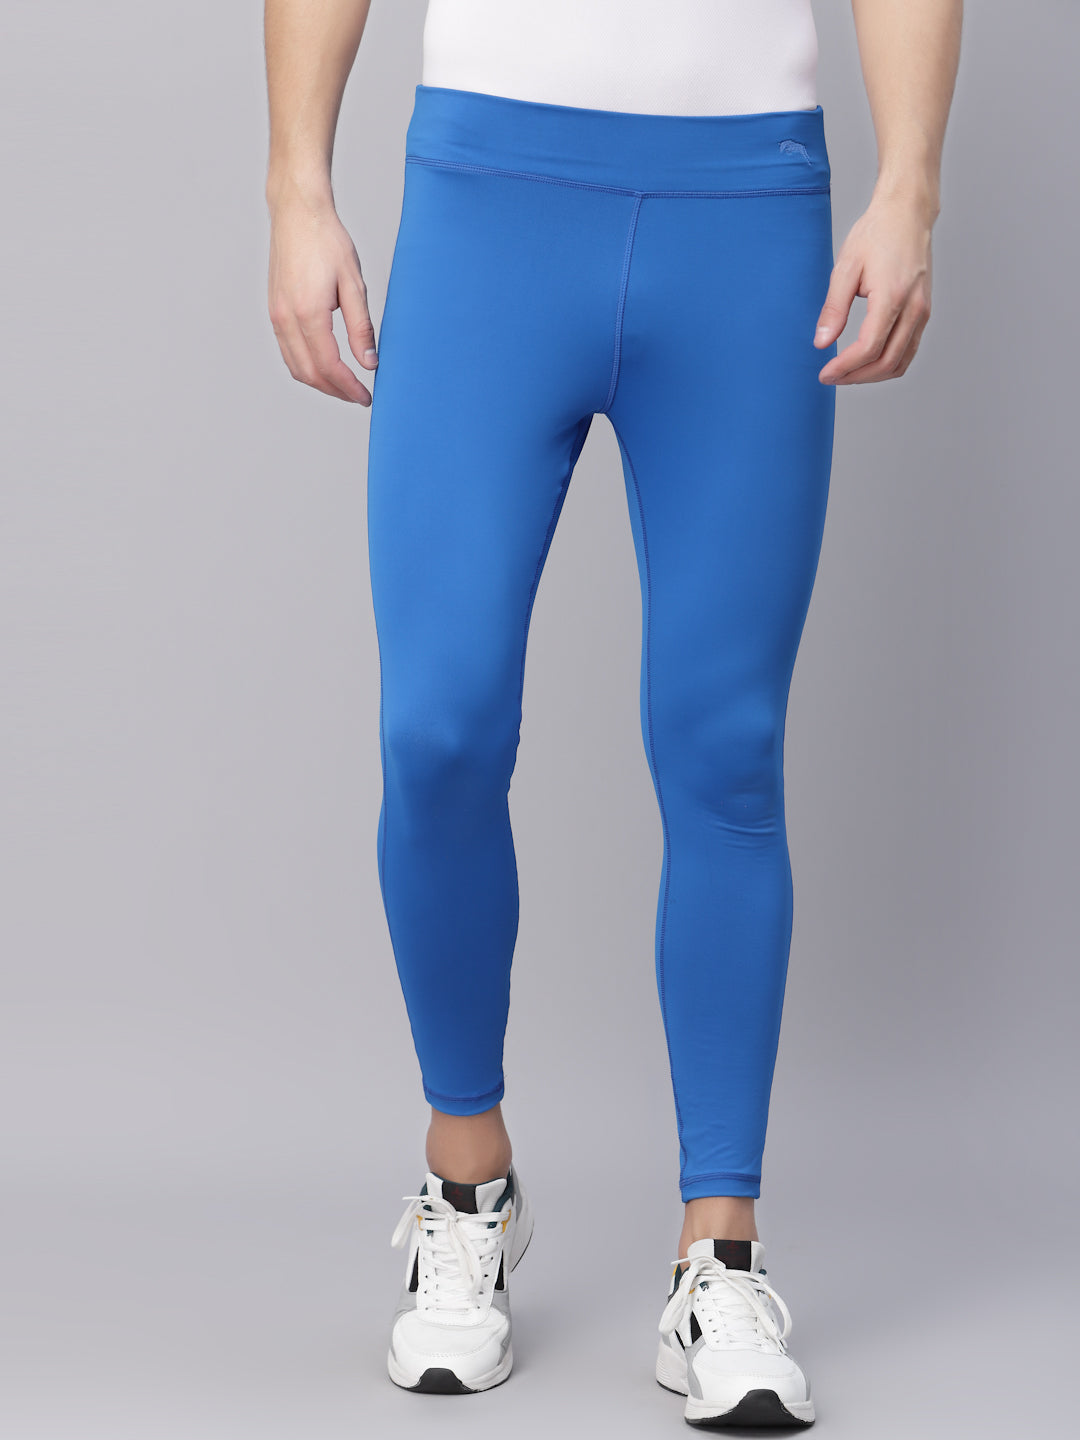 JUMP USA Royal Blue Rapid-Dry Training Tights For Men